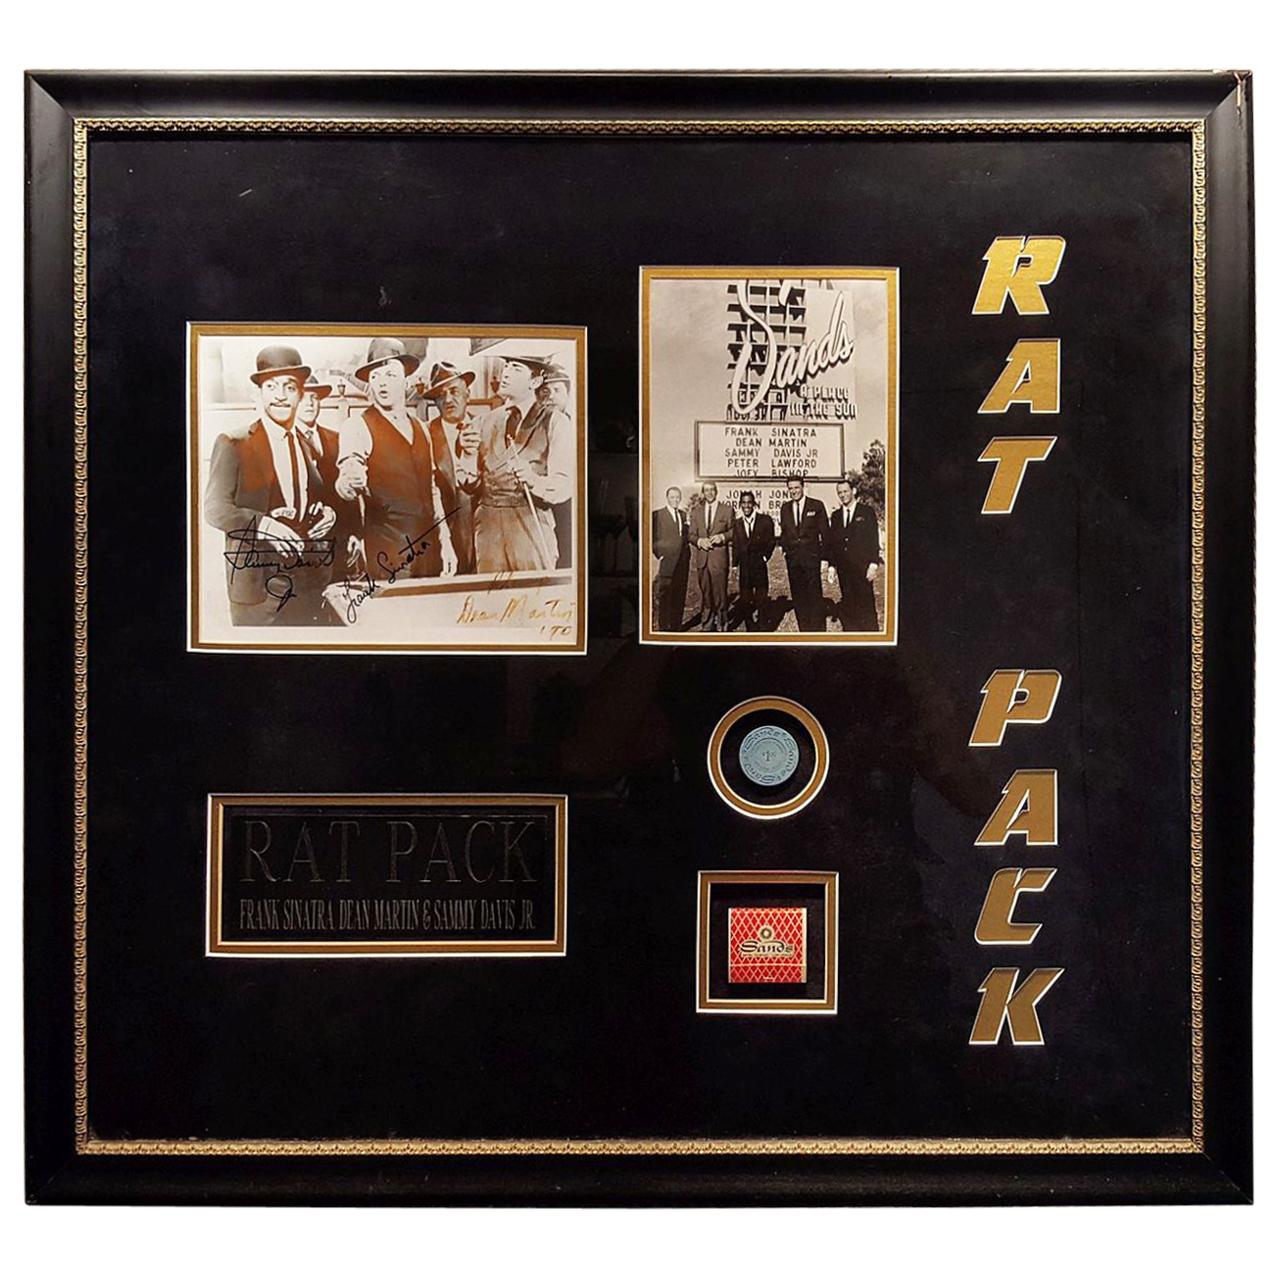 Framed and Autographed Rat Pack Collectible, Sands Casino Las Vegas For Sale